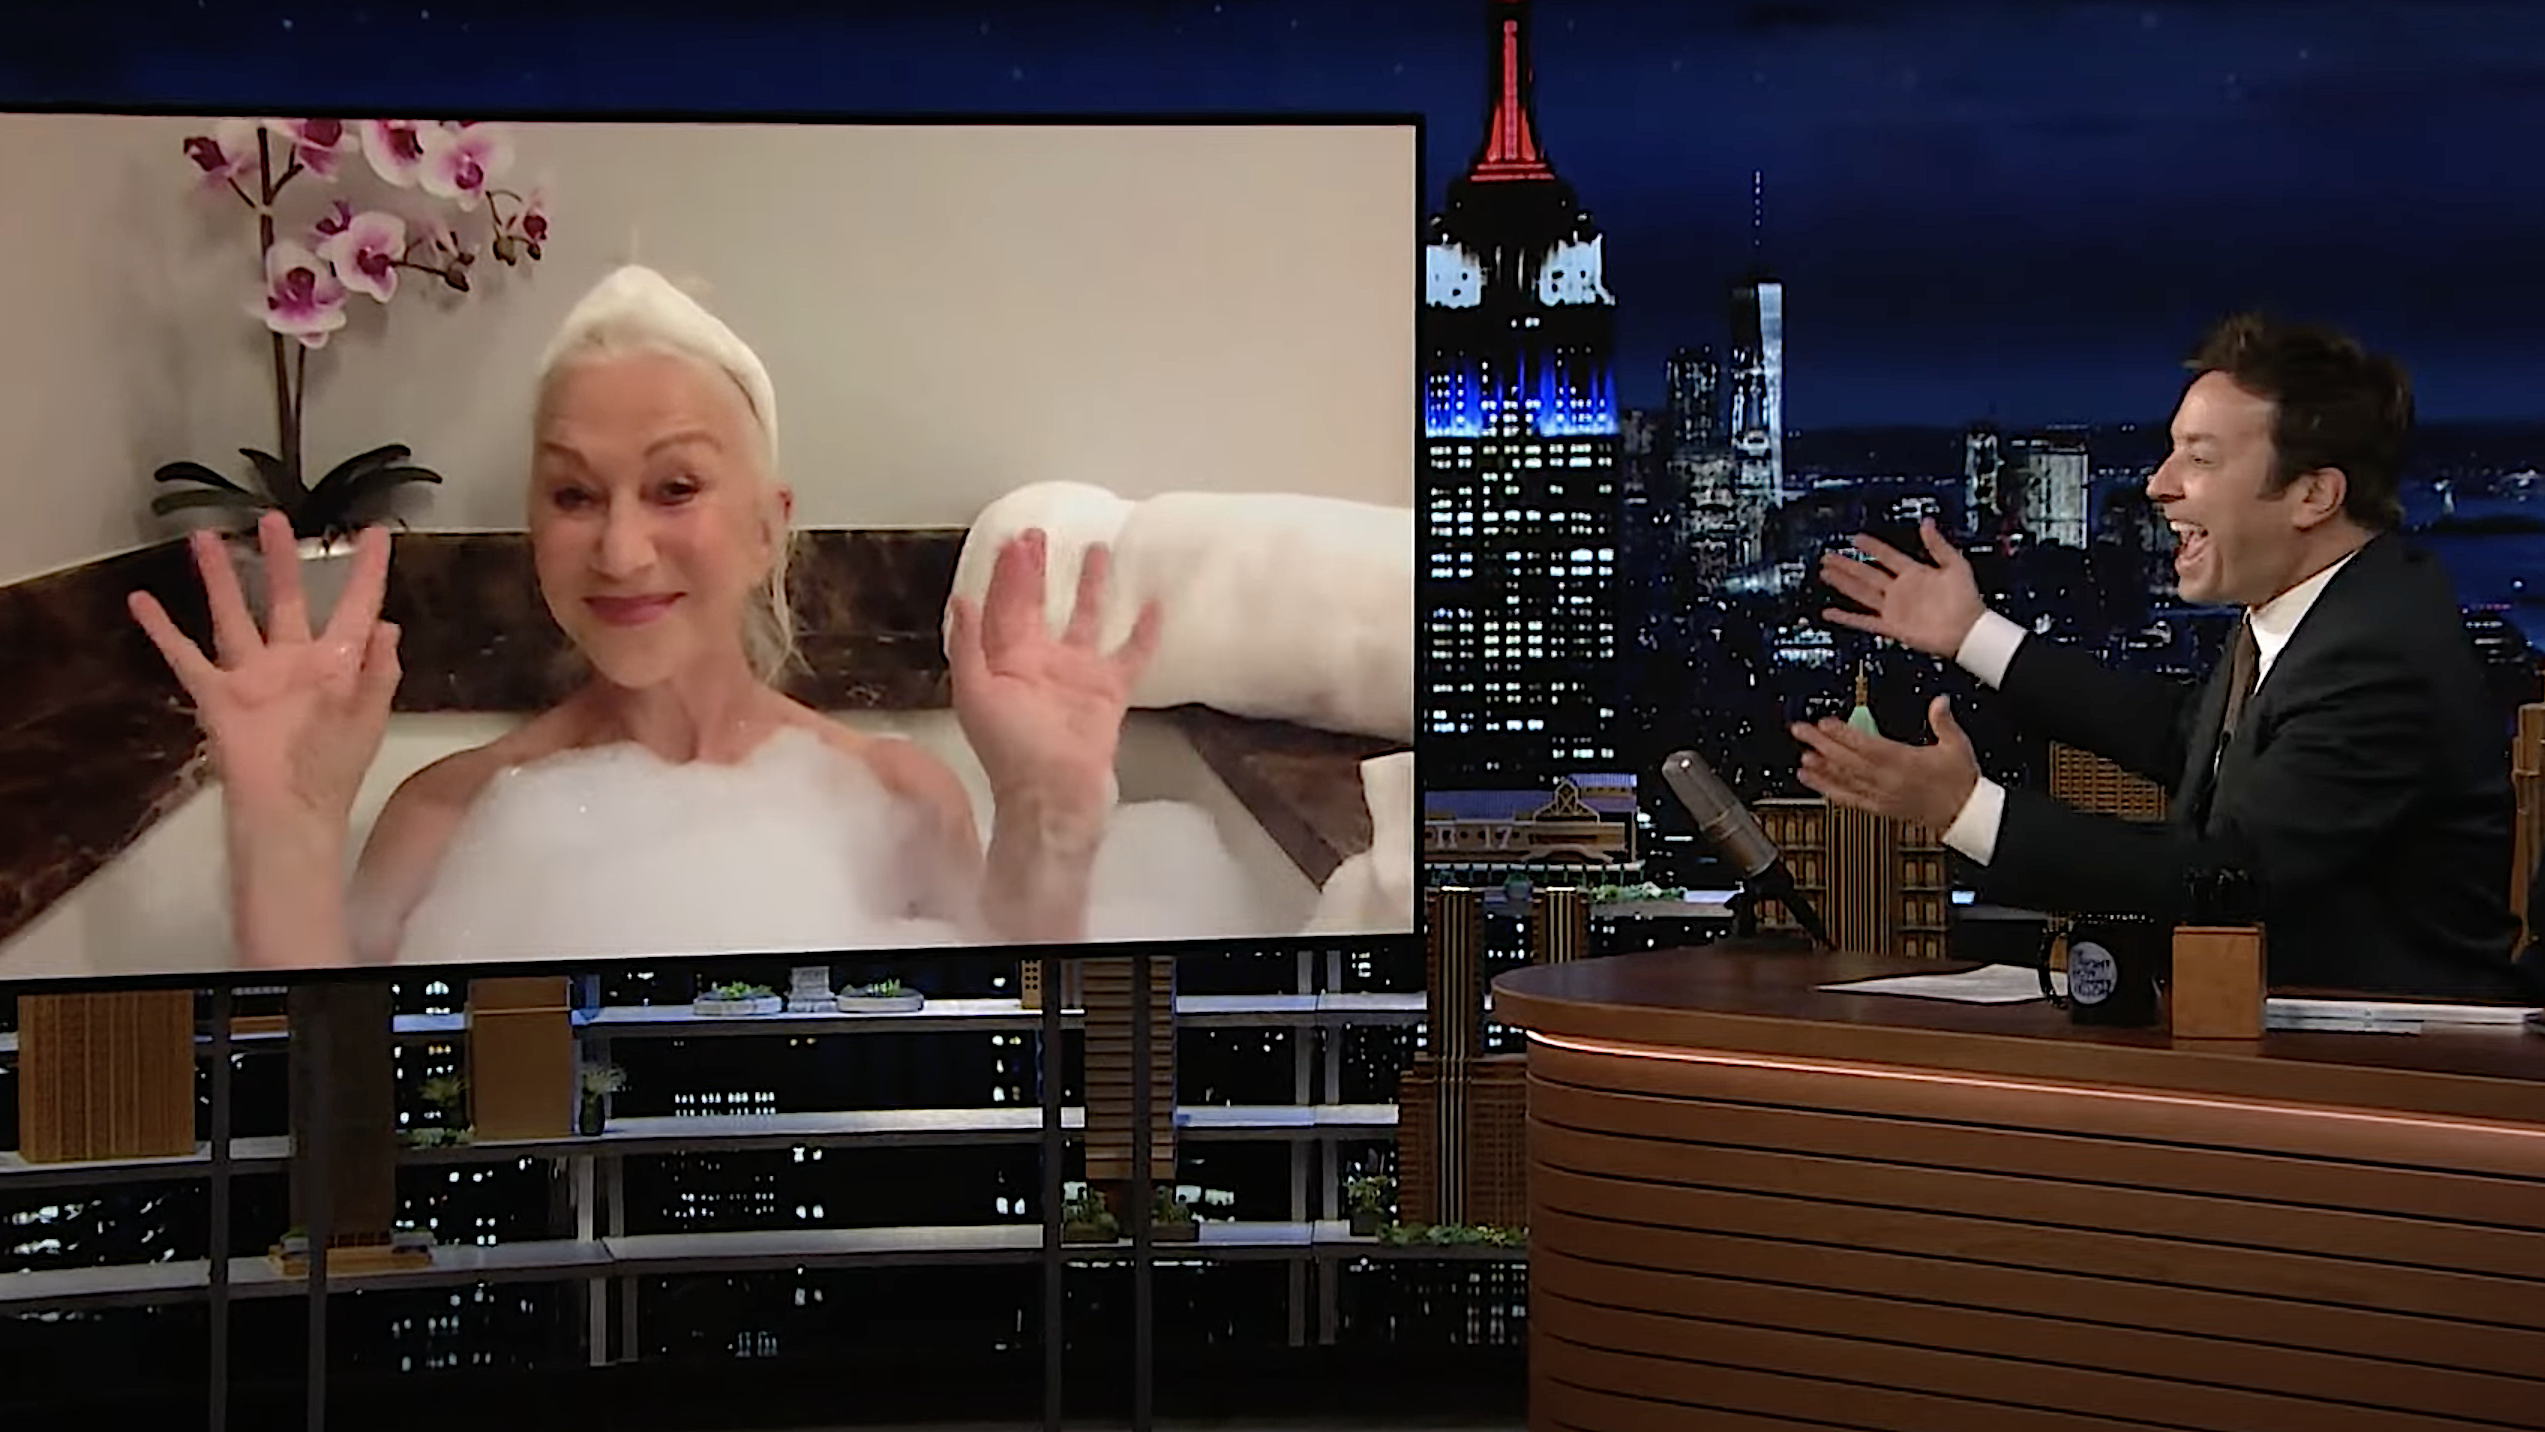 Just Helen Mirren in a bubble bath, spilling stories about confronting Keith Moon, and a bear